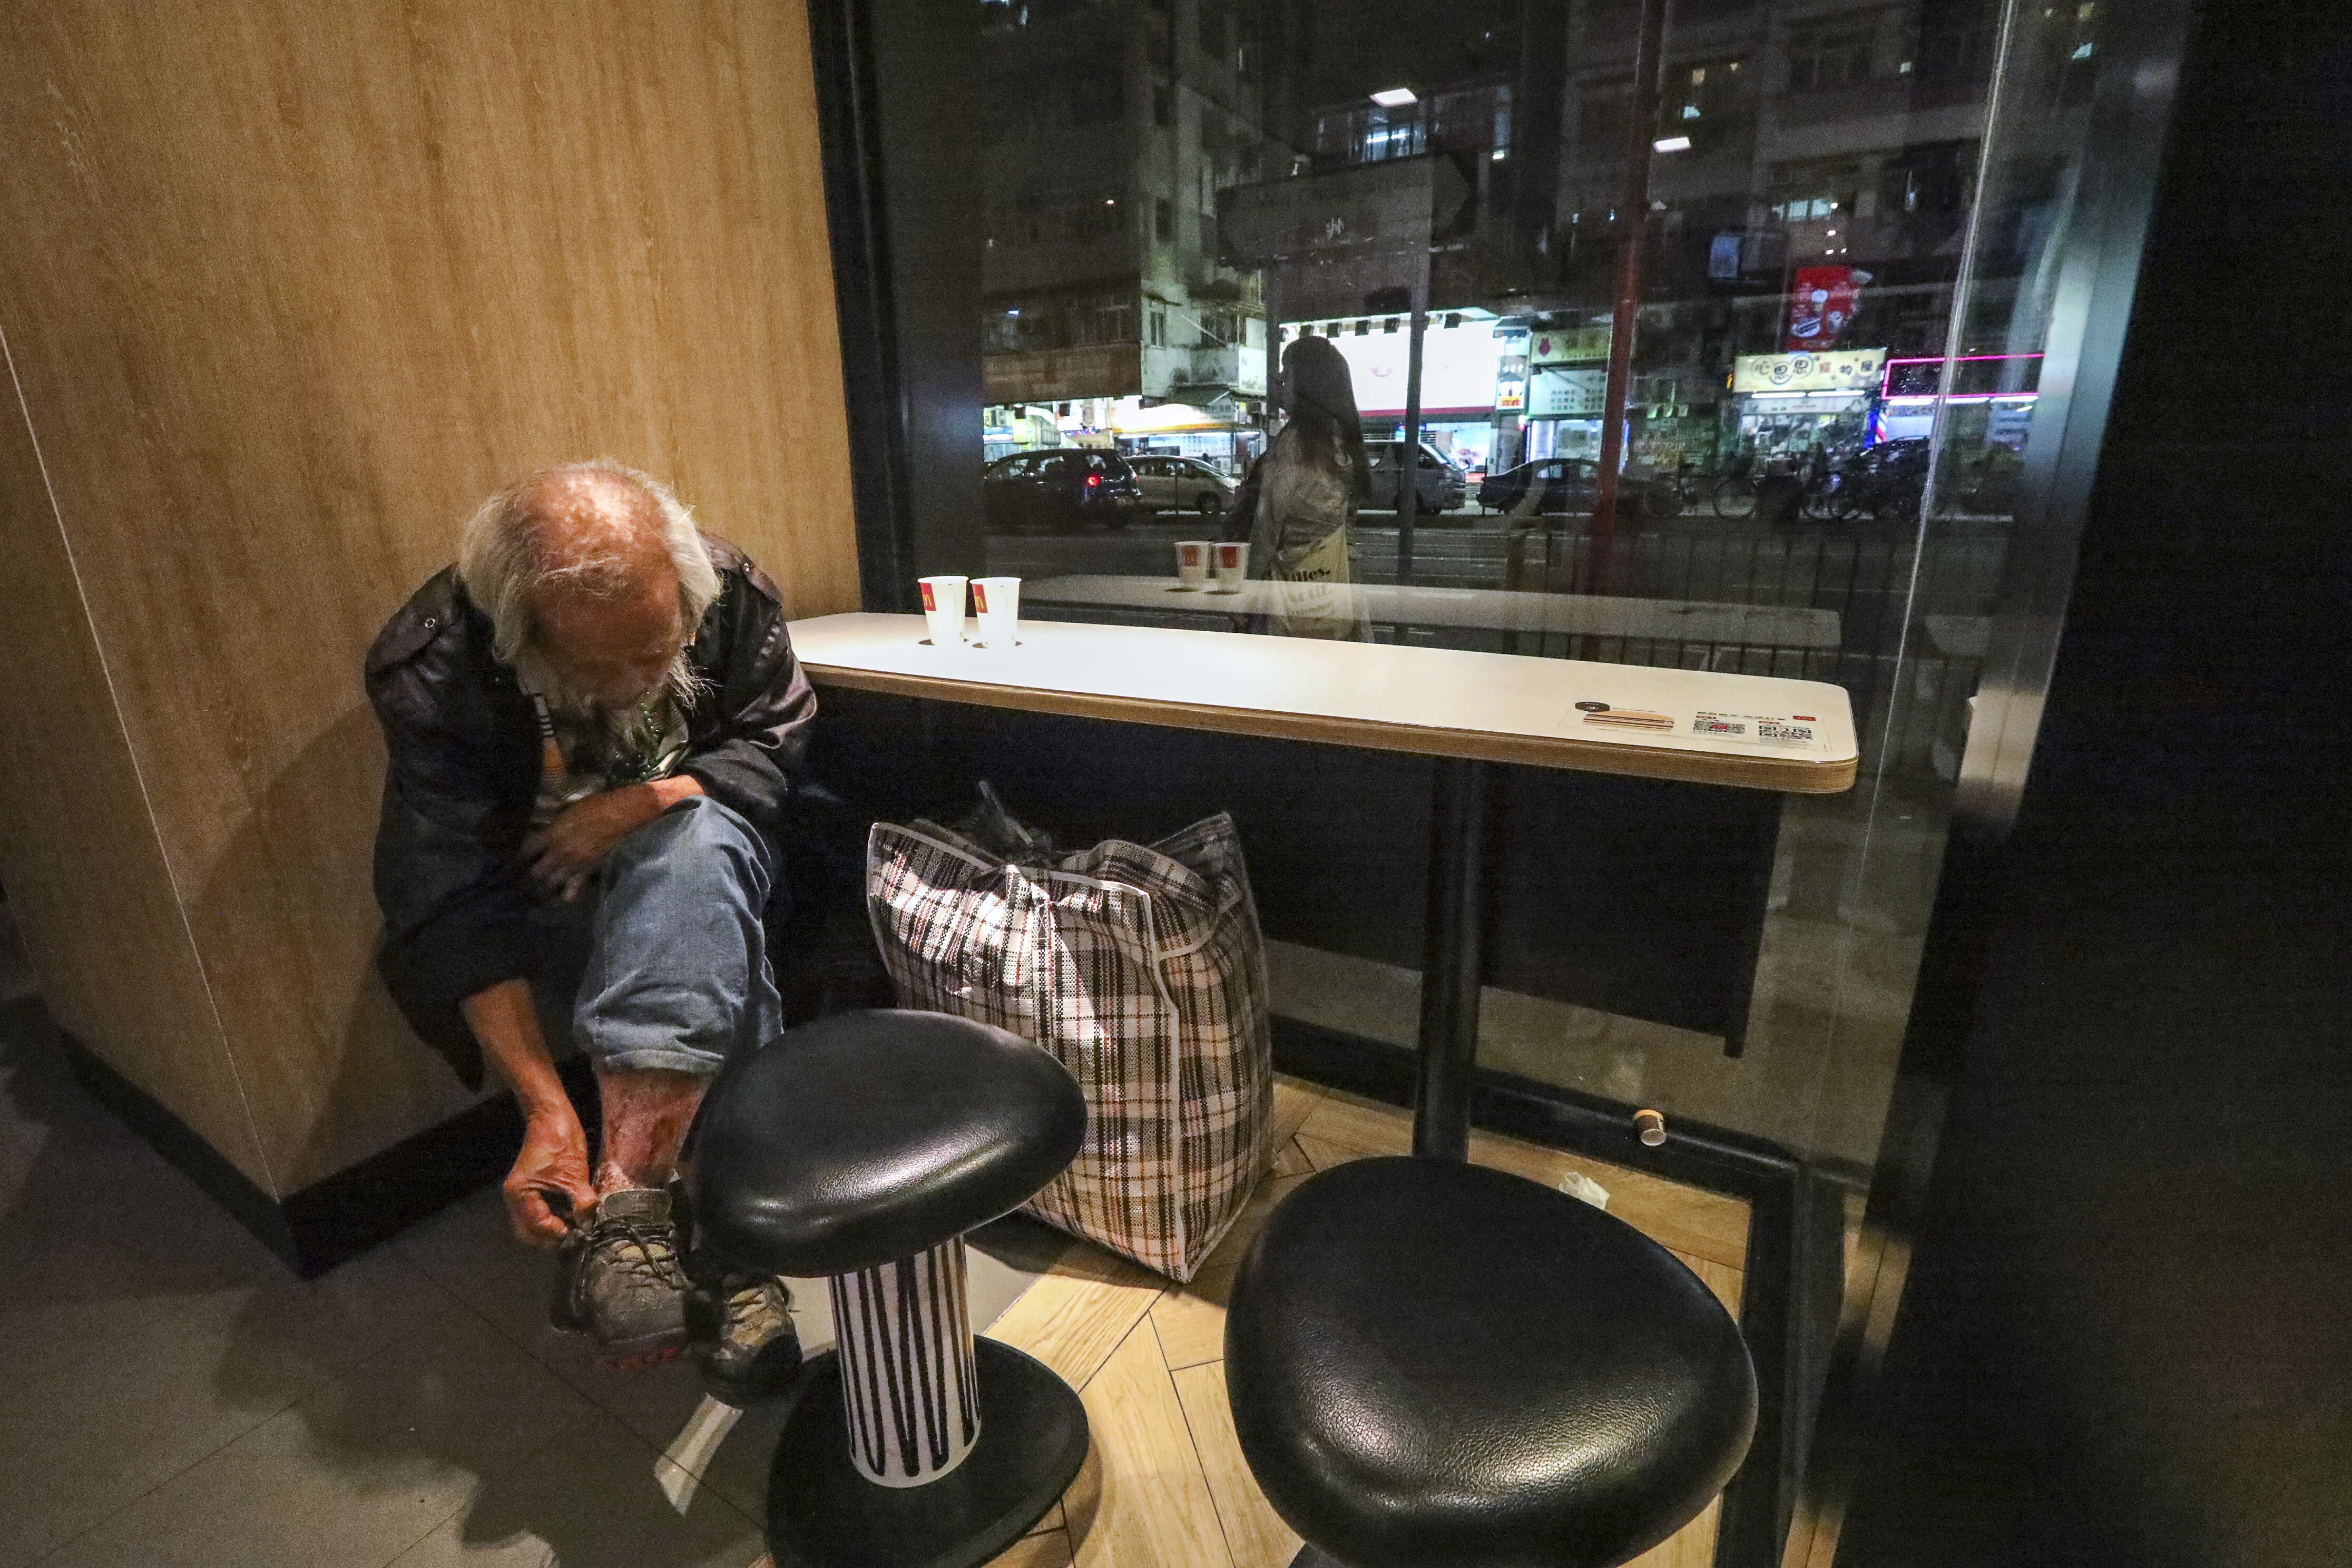 An elderly diner at a fast-food restaurant in Hong Kong’s Sham Shui Po district in December 2019. One in three elderly people in Hong Kong lives in poverty. Photo: Felix Wong